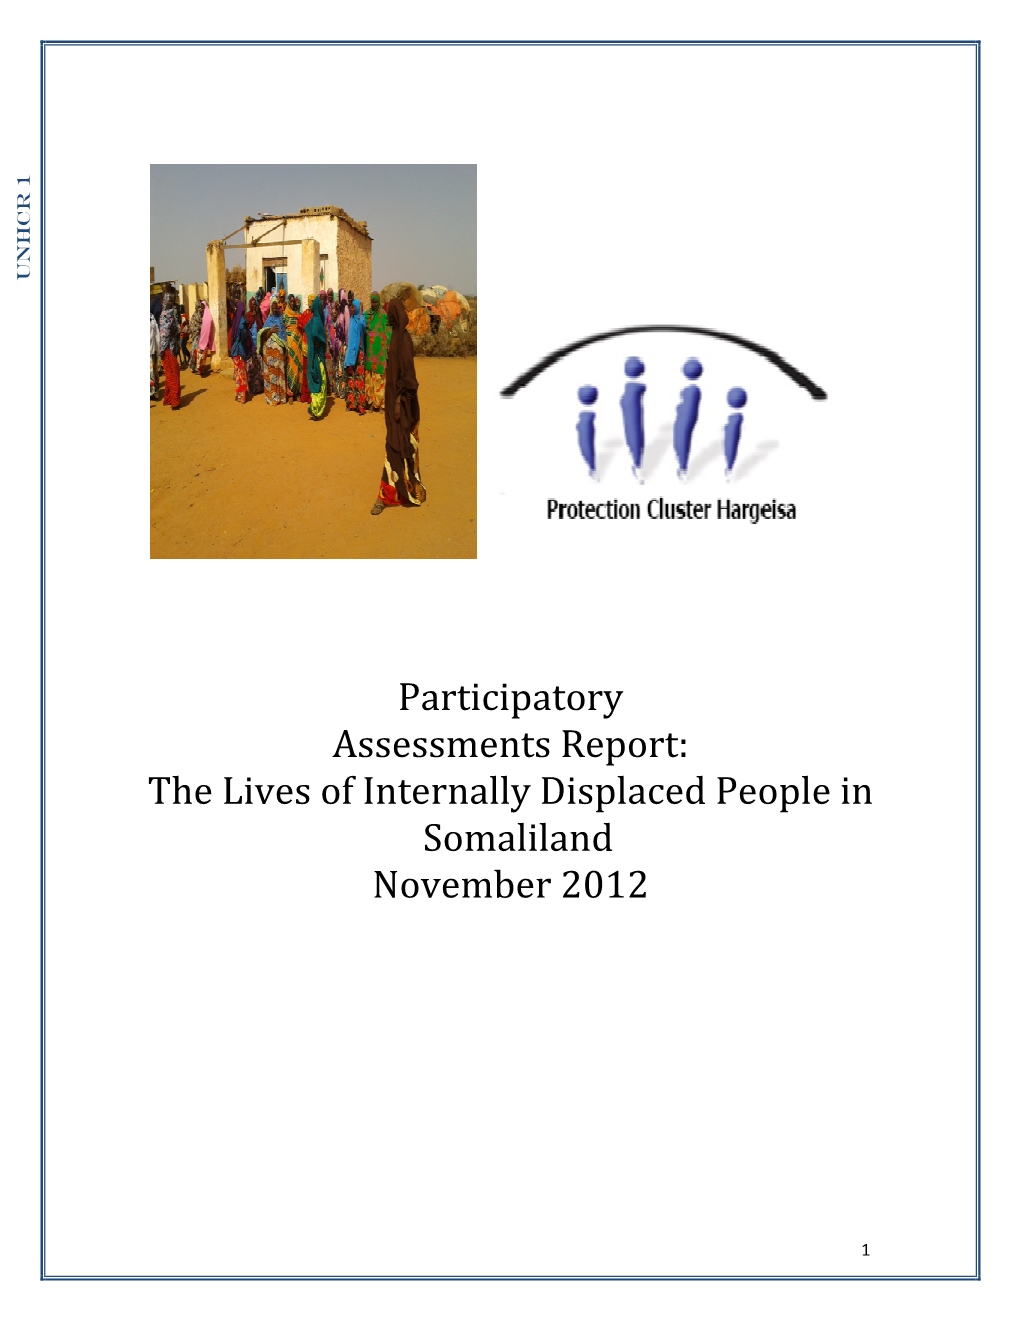 Participatory Assessments Report: the Lives of Internally Displaced People in Somaliland November 2012